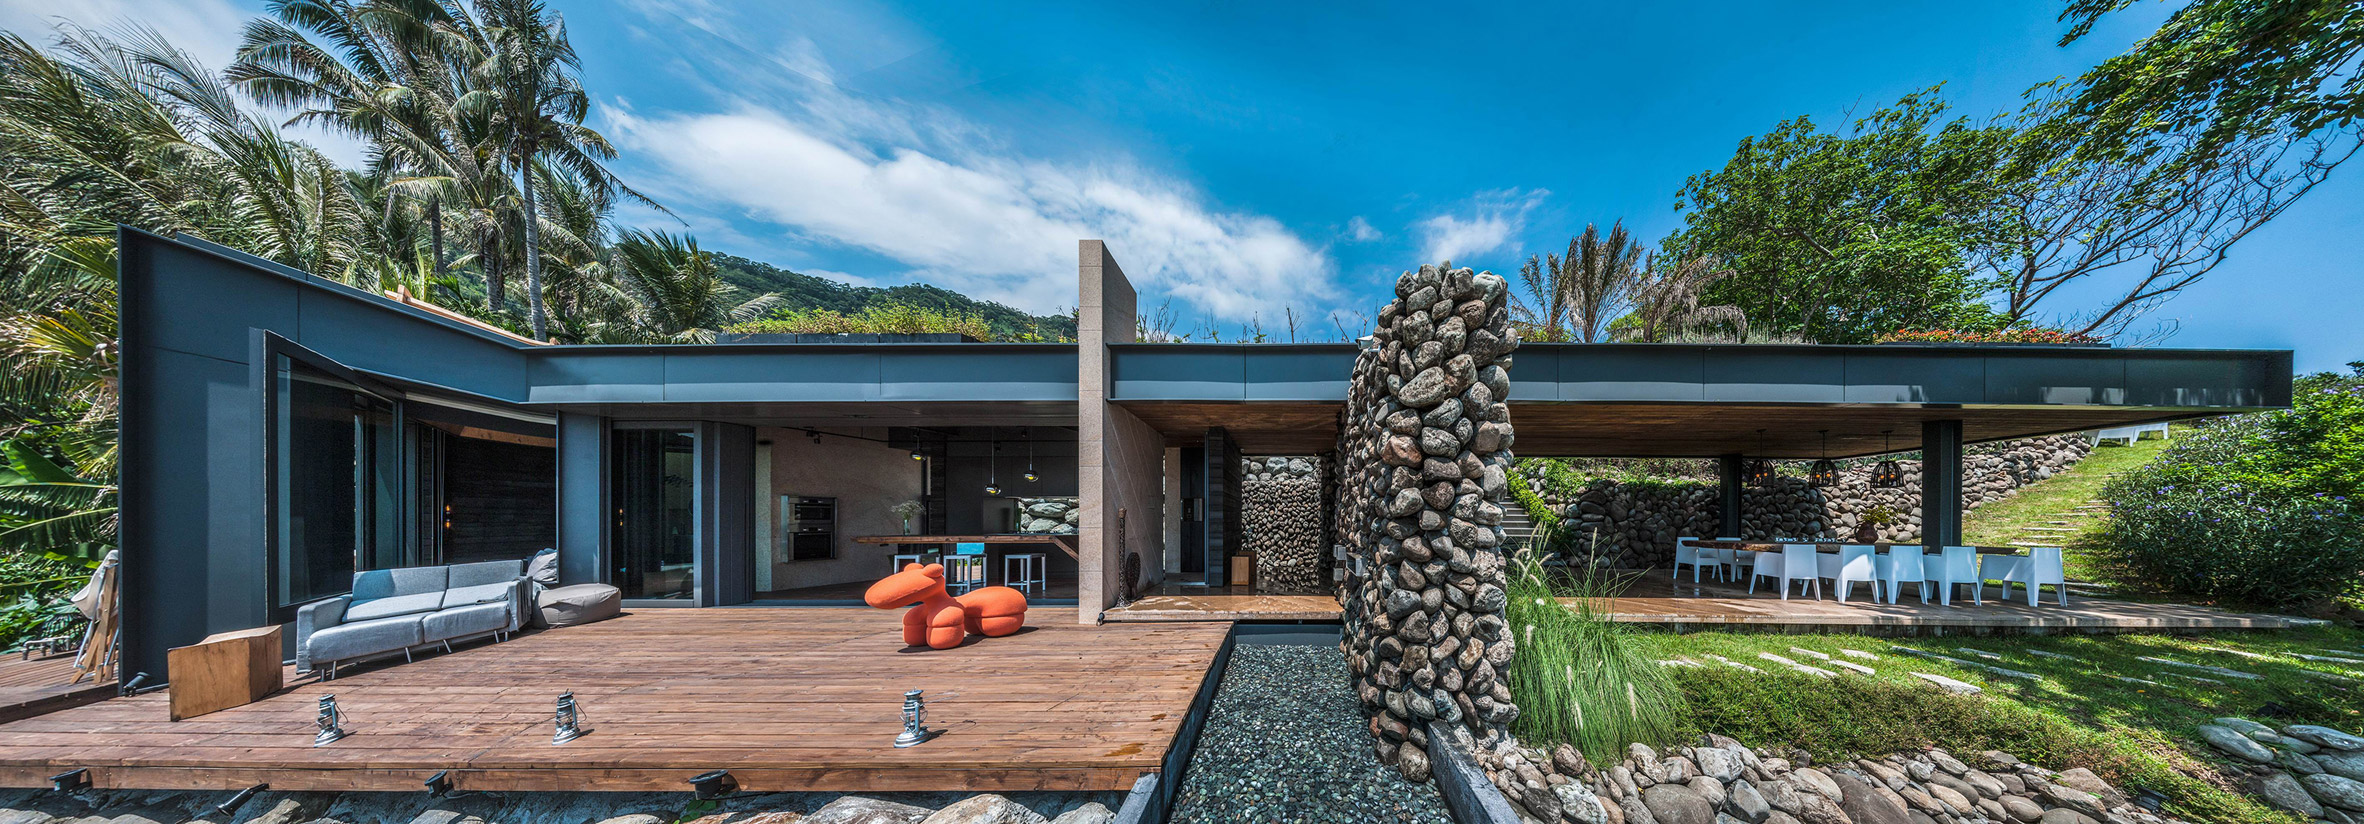 The extensive use of wood and large stones add a textural look to the outdoor space